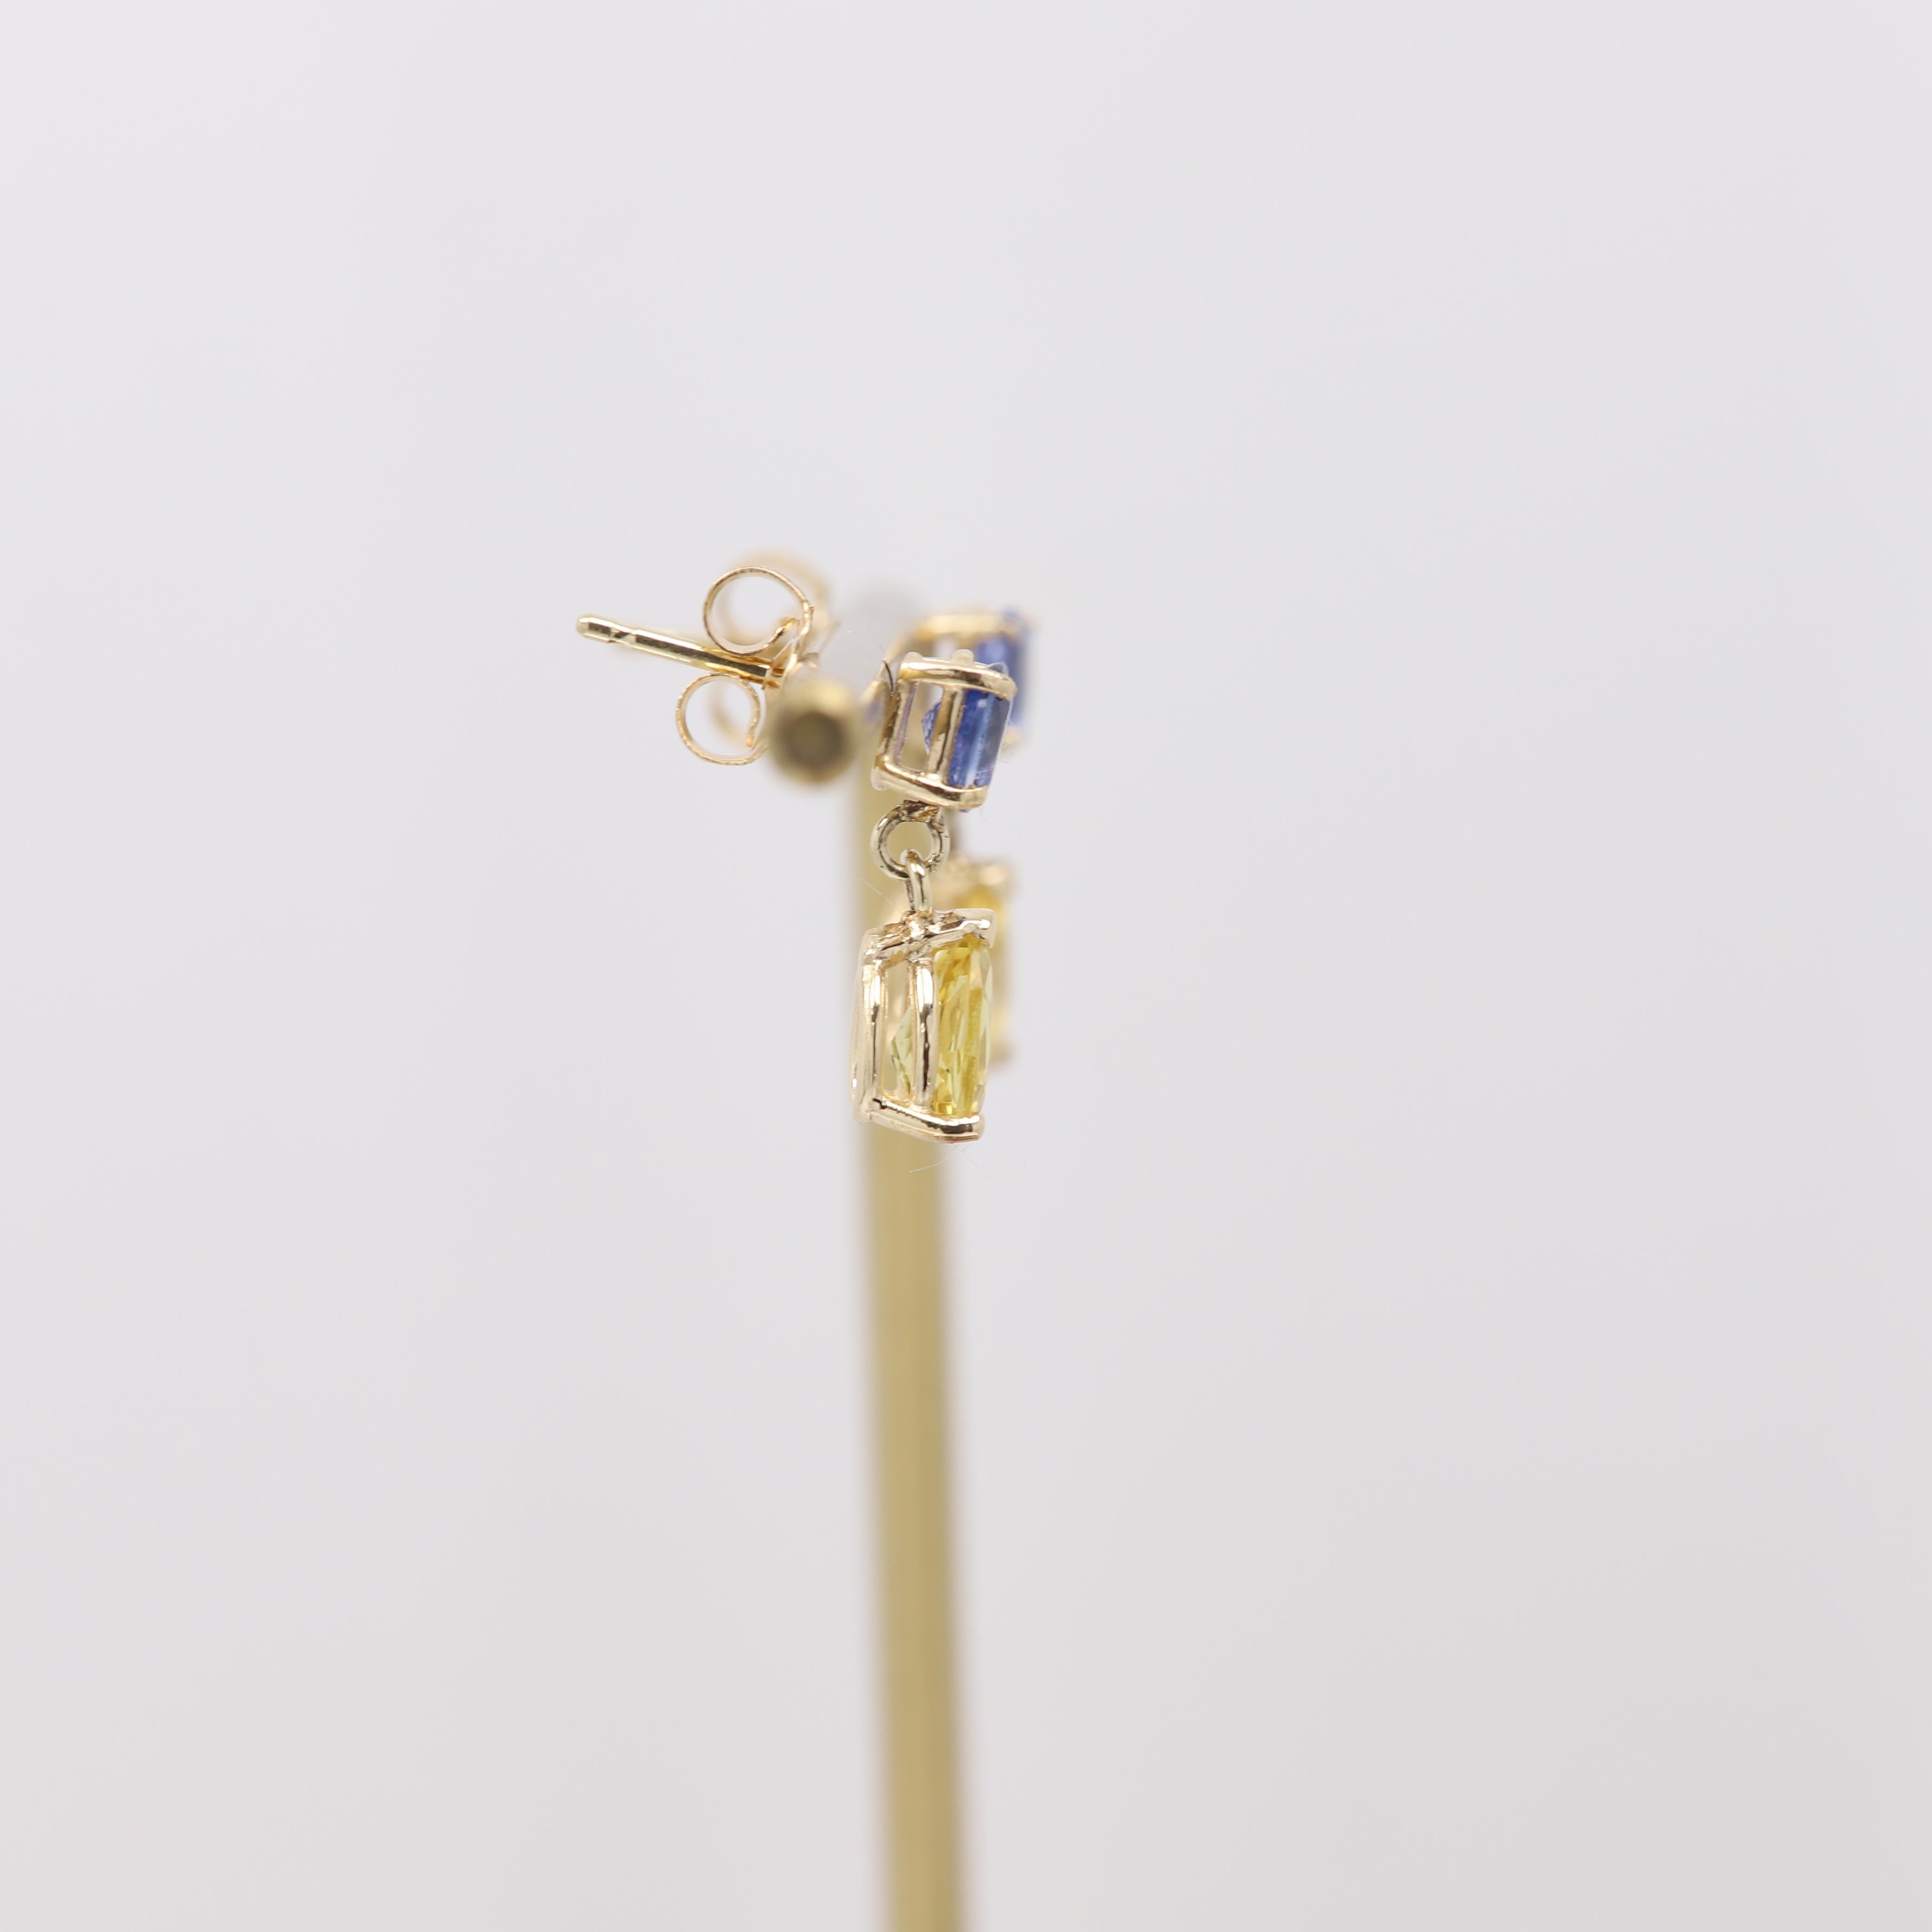 Cute Dangle Earrings
Natural Blue Sapphire & Yellow Citrine
14k Yellow Gold 1.30 grams
Blue Oval shape sapphire 3.6 x 4.6mm
Yellow Pear Shape citrine 6 x 4 mm
Approx Total 1.40 Carat 
Total 1.30 grams real 14k Gold
Standard Butterfly Push